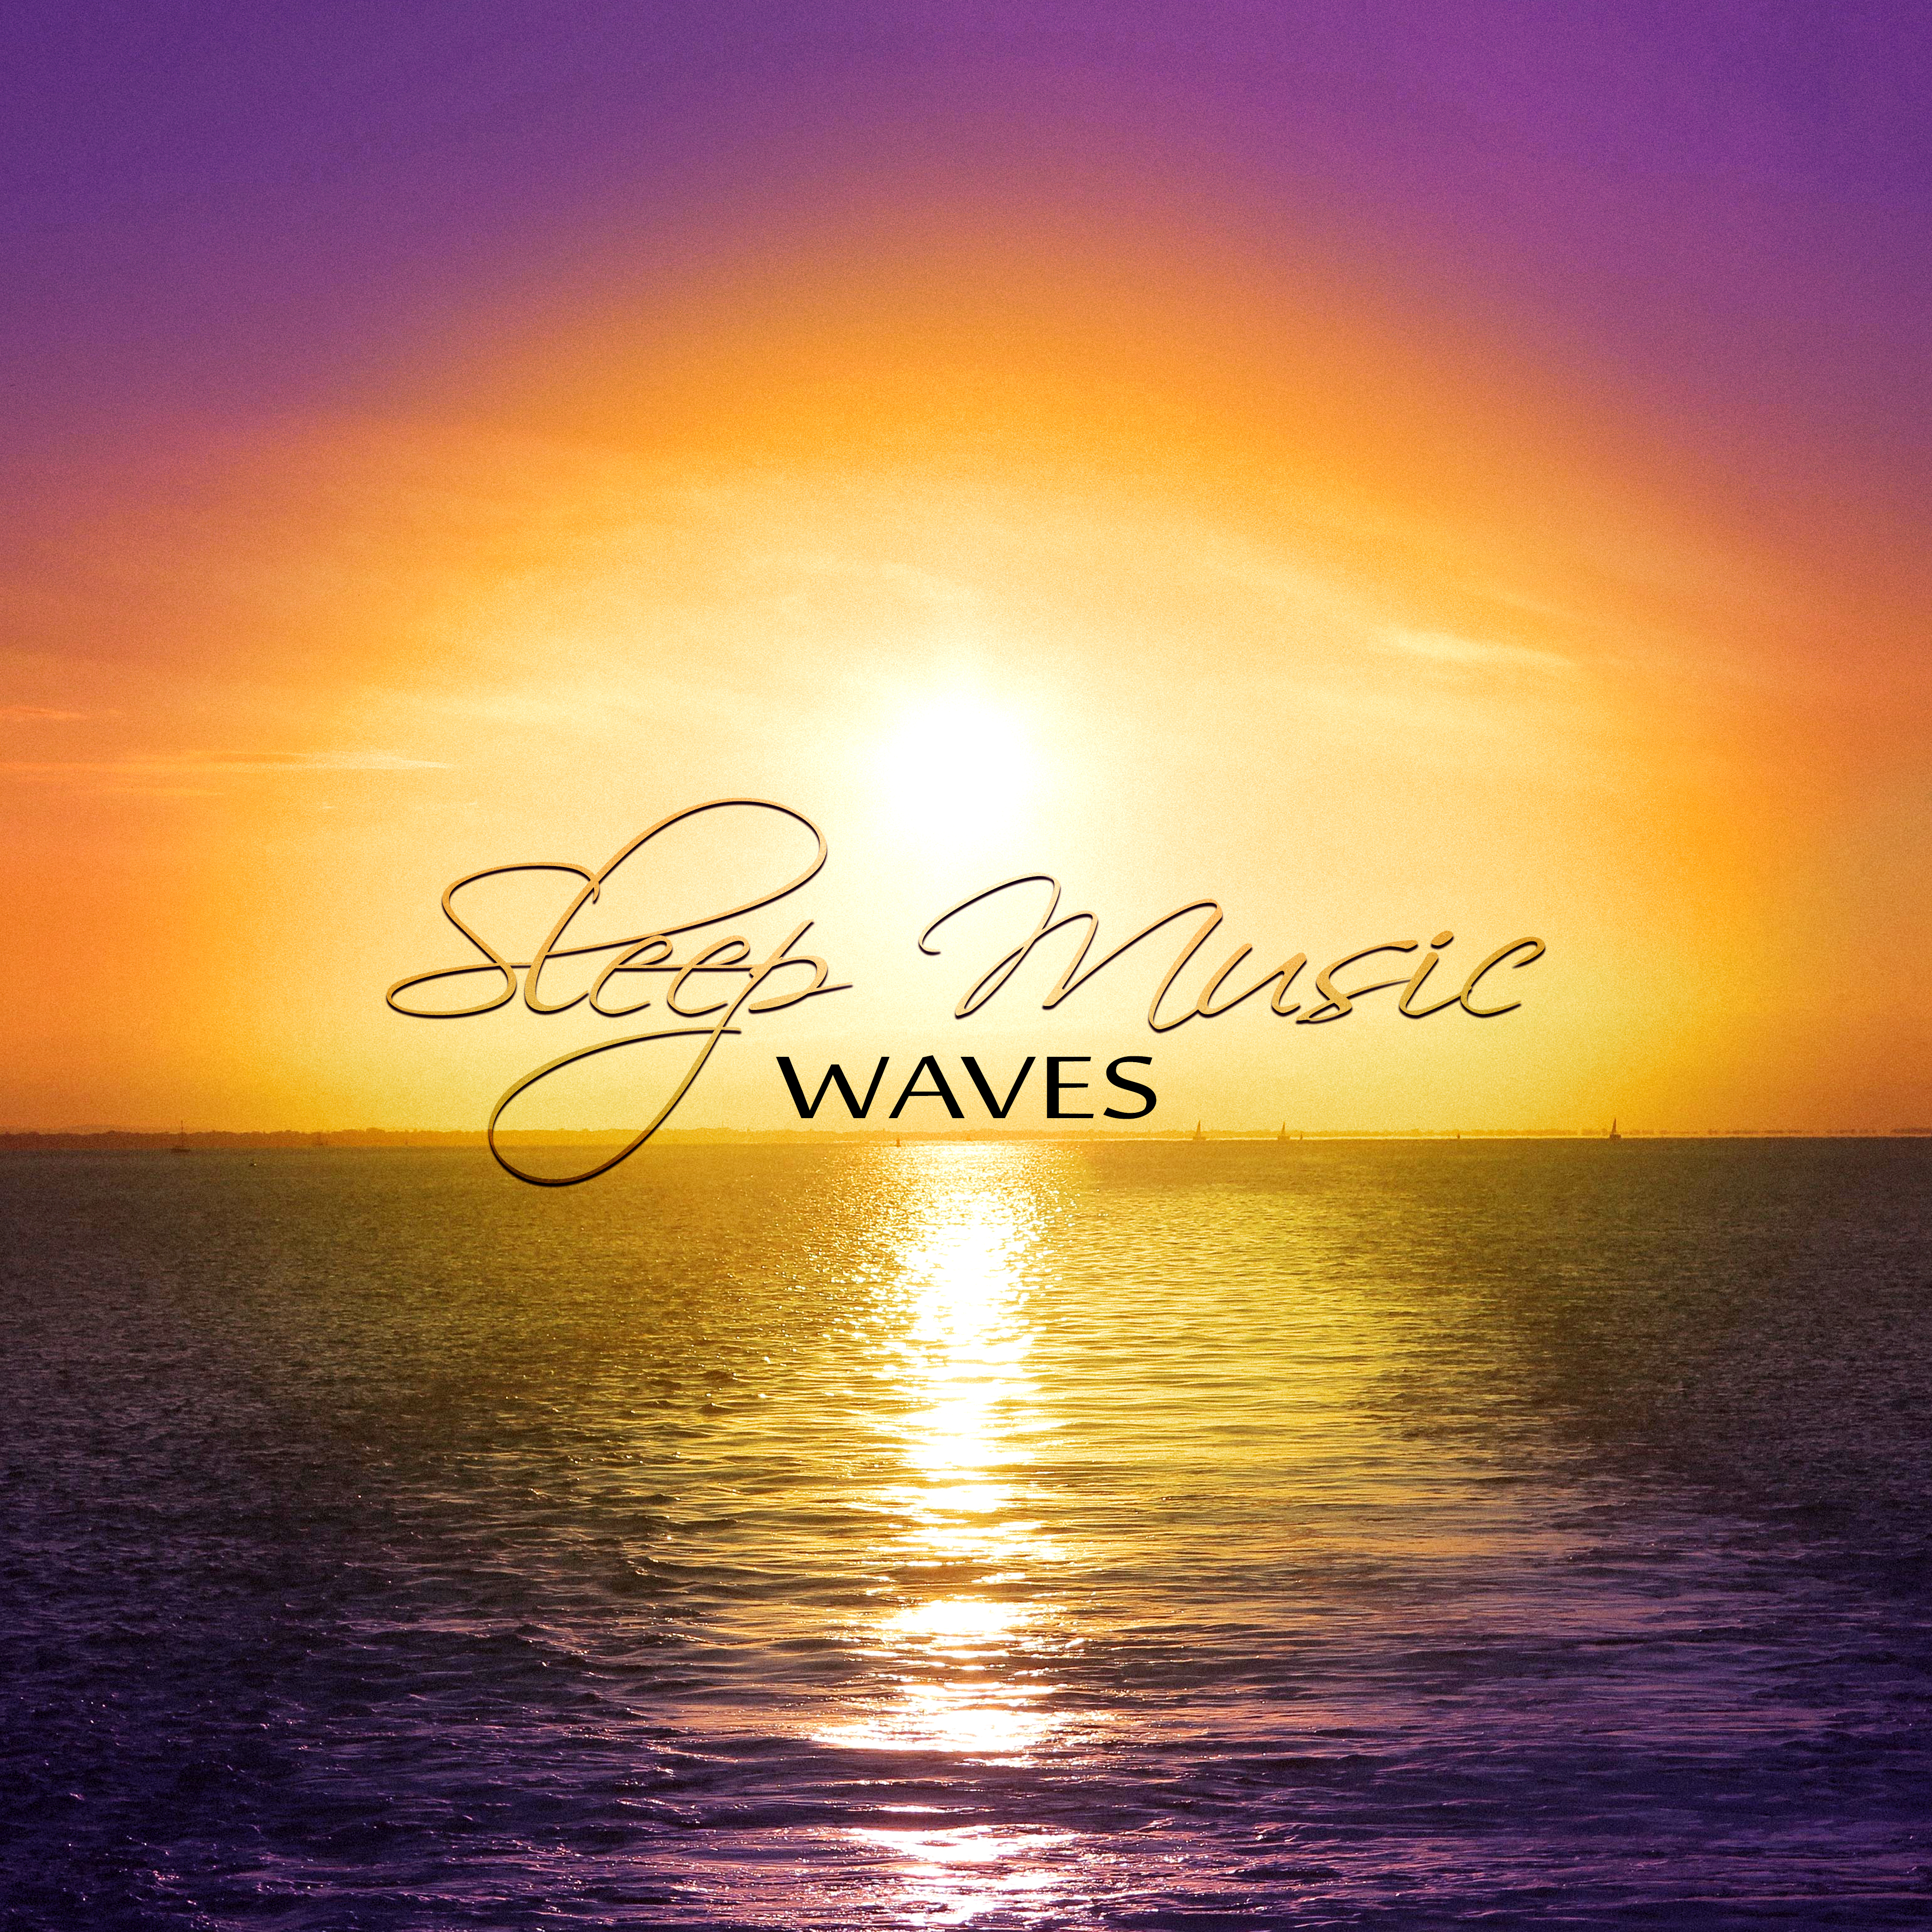 Sleep Music Waves – Meditation Relaxation Sounds, Soothing Massage Therapy, Sleep Music for Lucid Dreaming